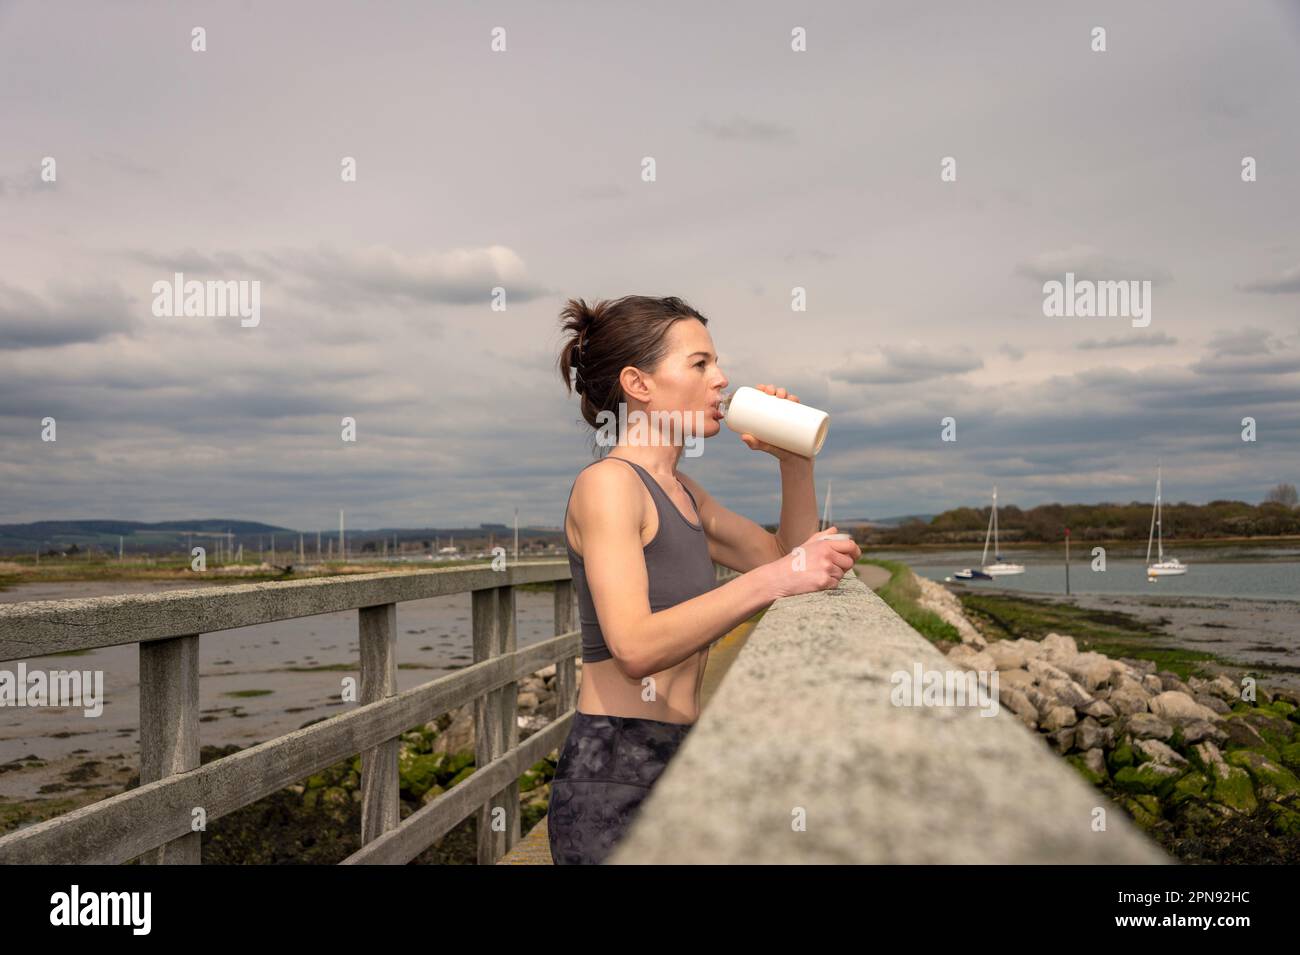 sportswoman drinking water from bottle after workout, resting on a bridge by the coast Stock Photo